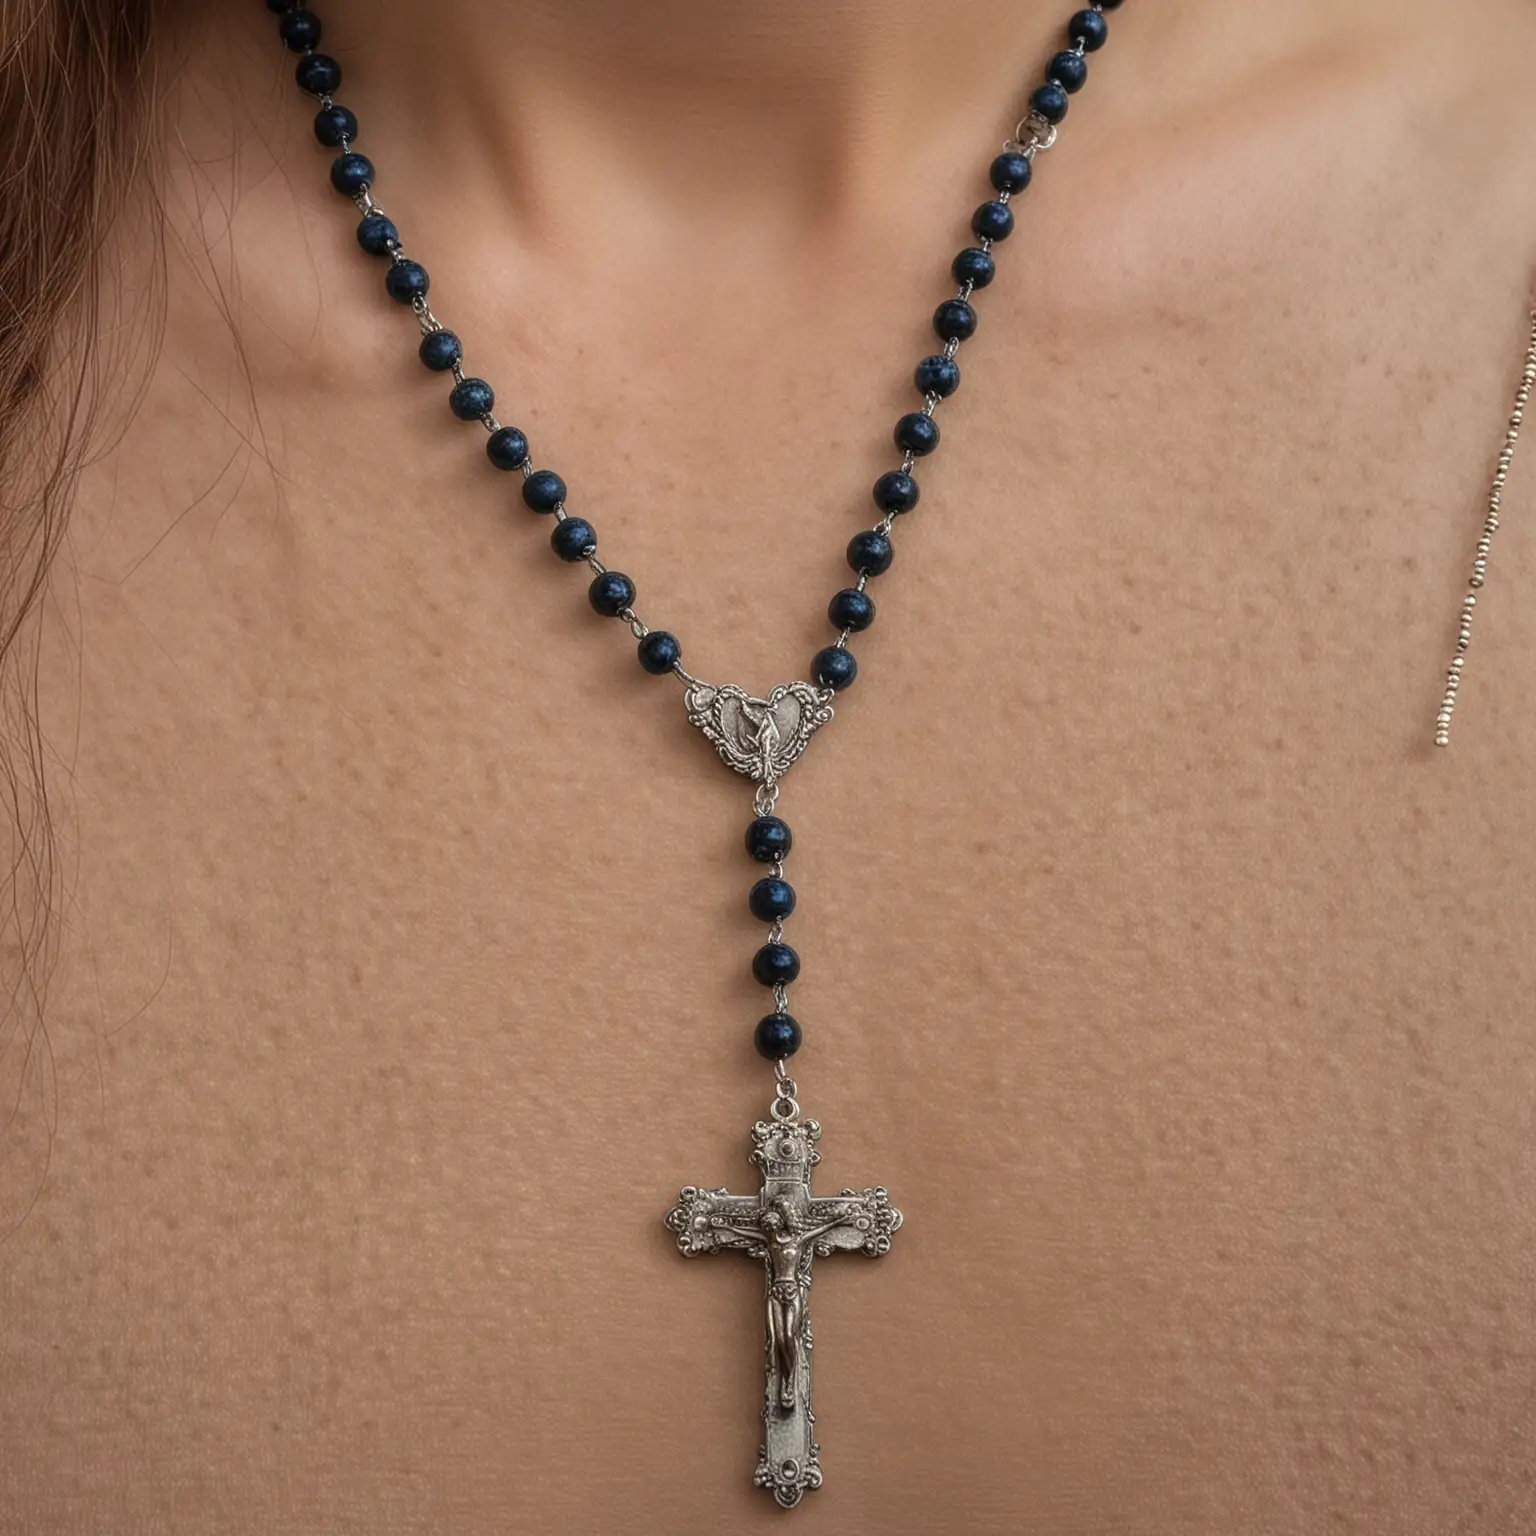 Person Holding Rosary Necklace